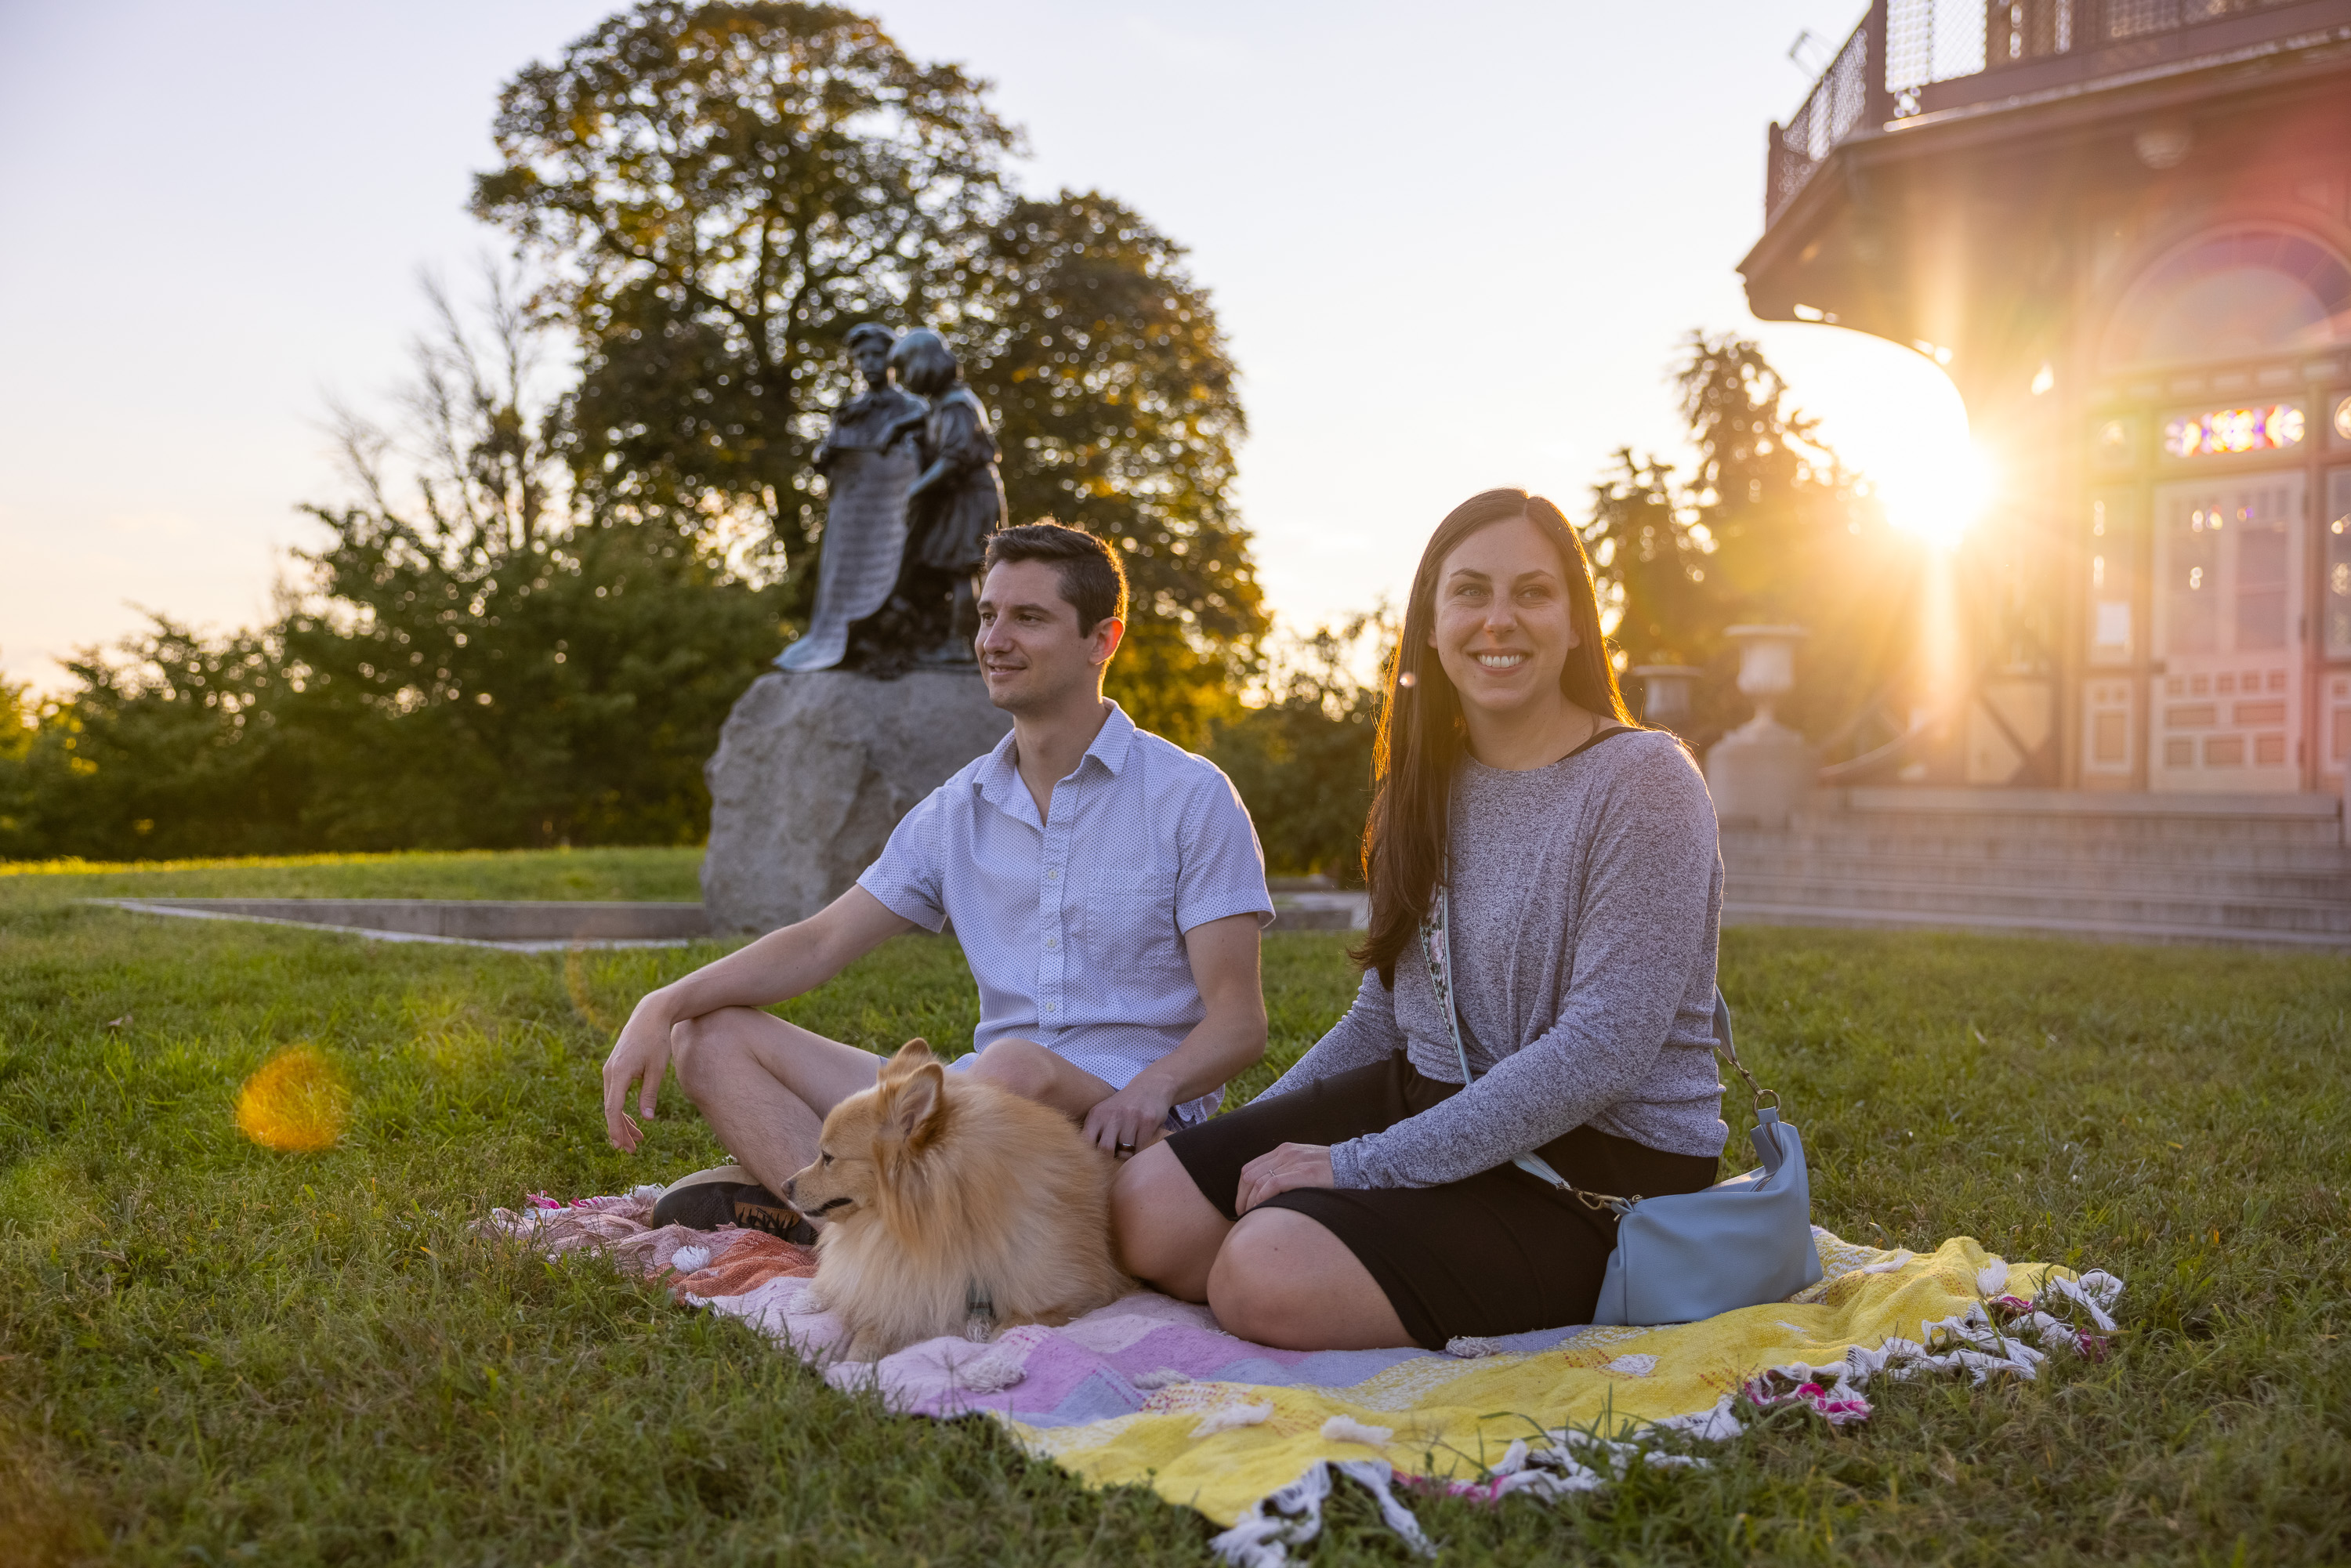 Photograph shows a man and a woman sitting on a blanket in the grass in a park with a dog.